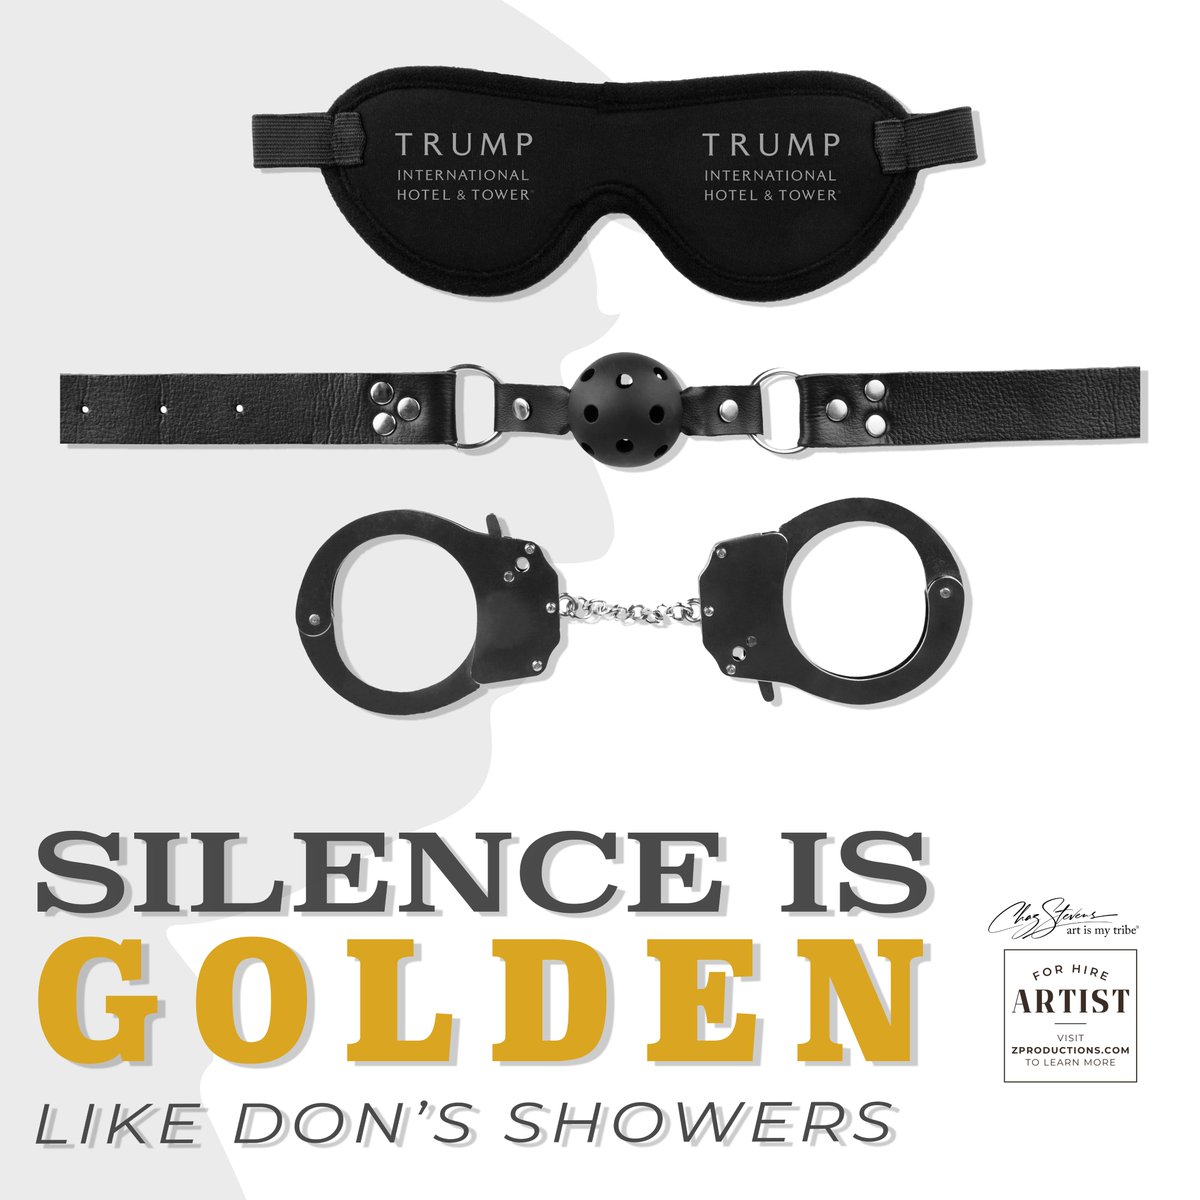 As Nana would say, accessories make the outfit ... #silenceisgolden #TrumpTrials